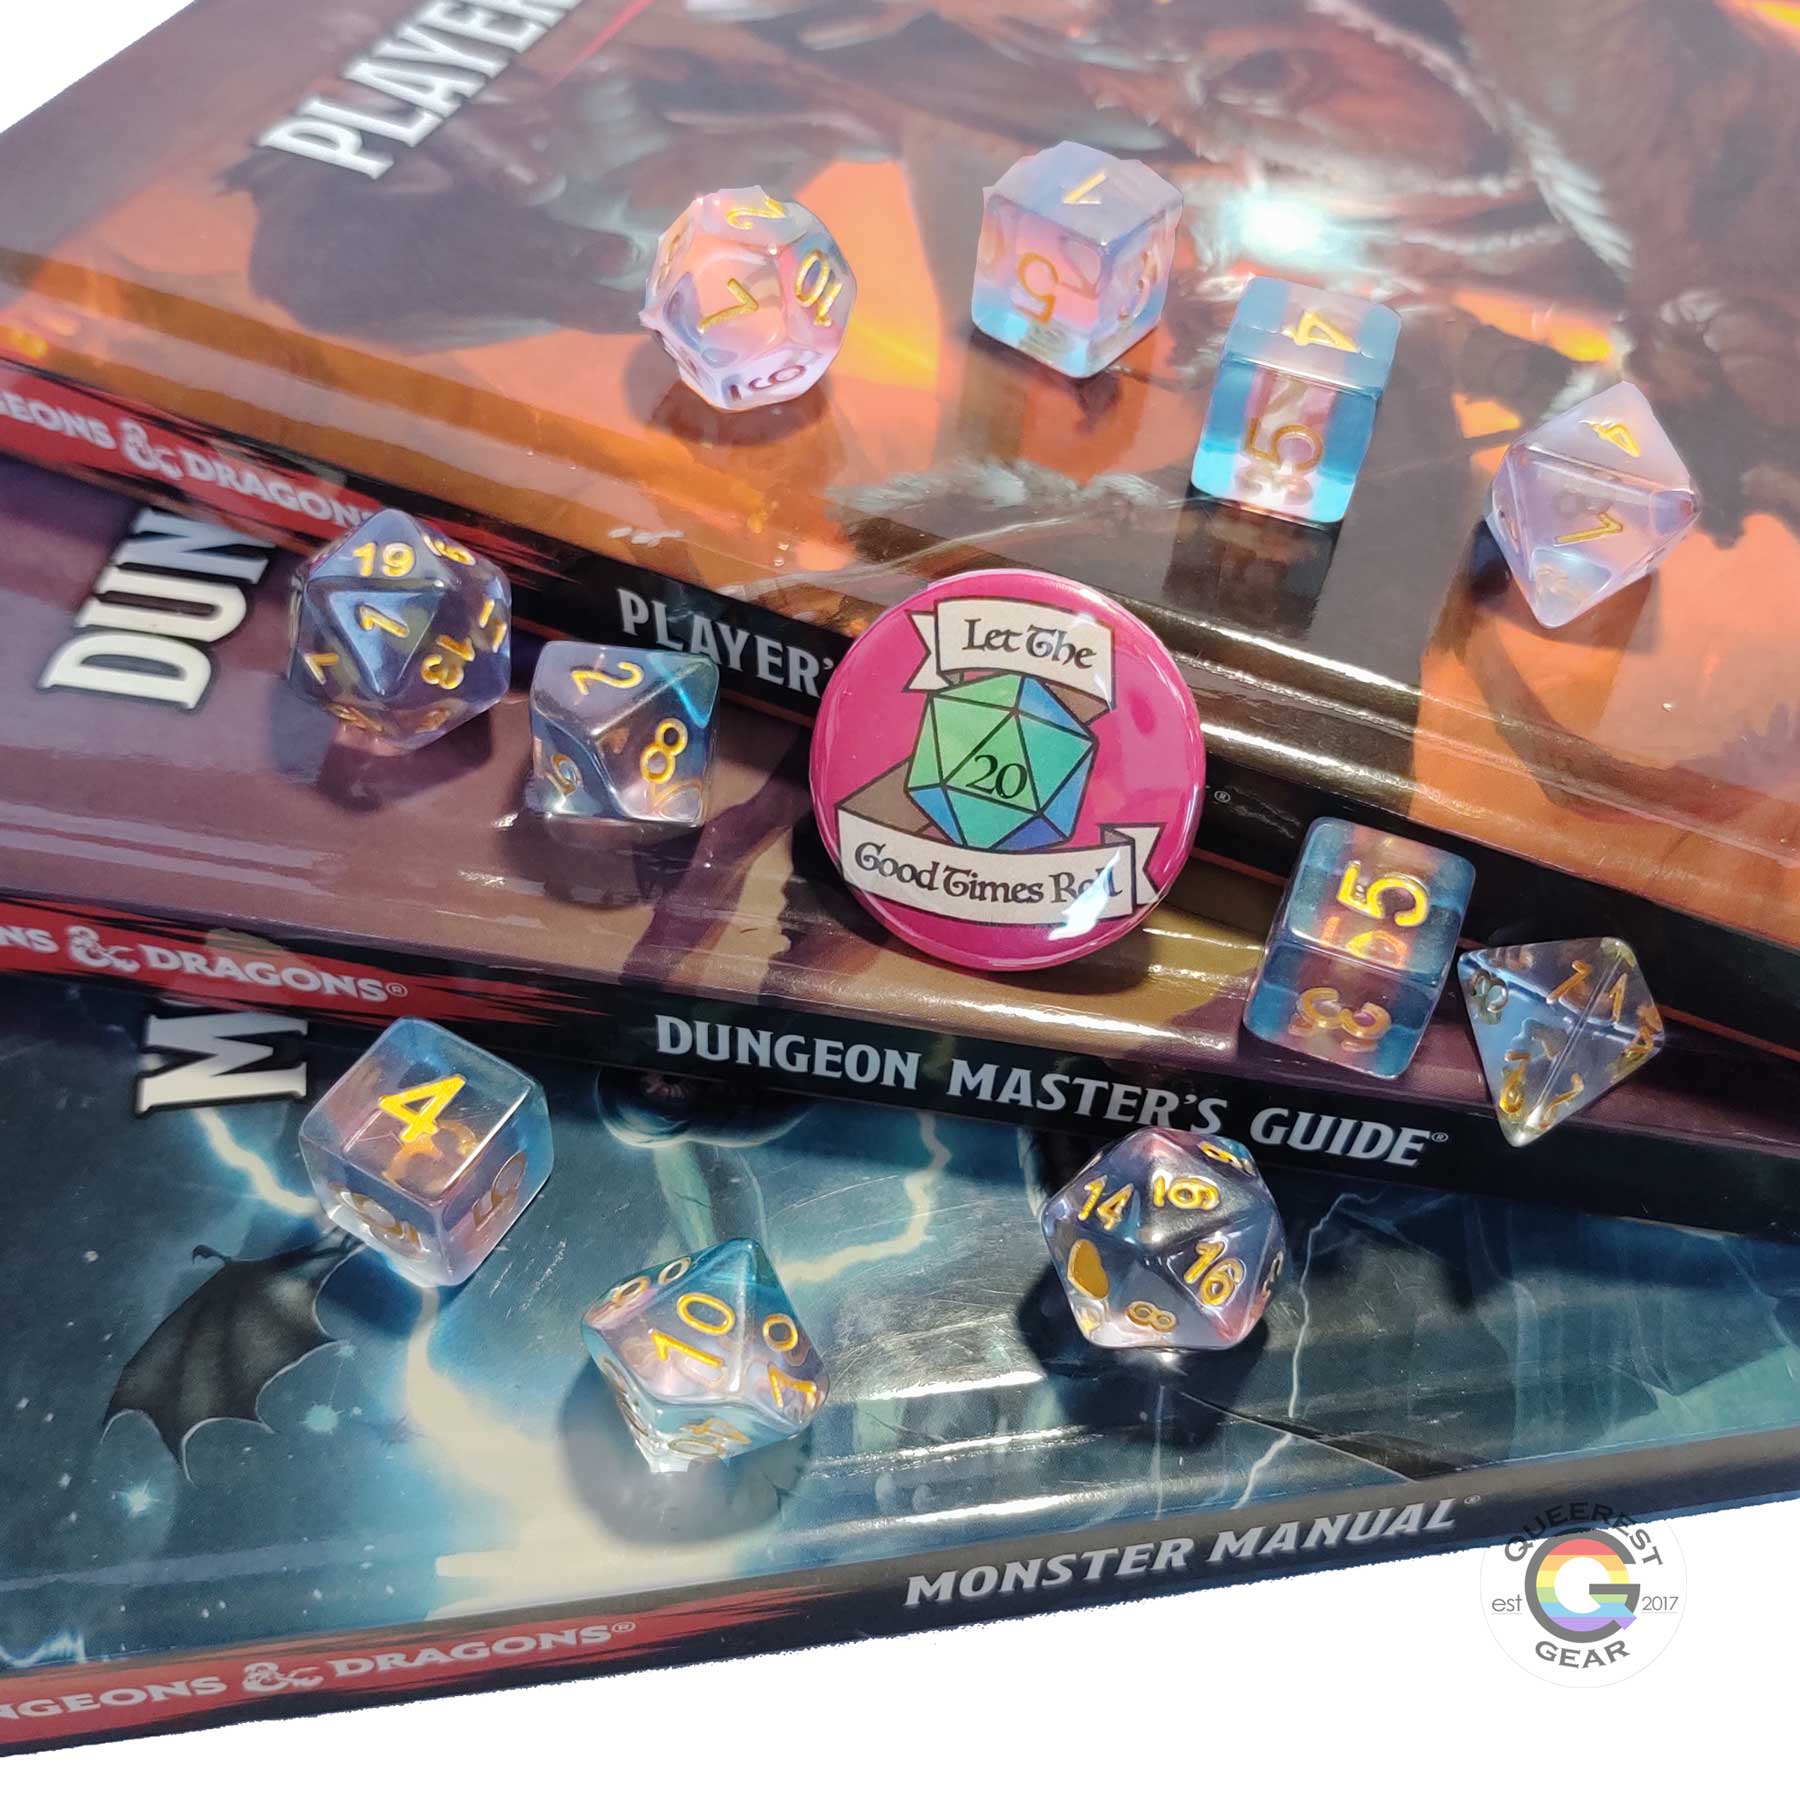 11 piece set of polyhedral dice scattered on a stack of D&D books. They are transparent and colored in the stripes of the transgender flag with gold ink. There is the freebie “let the good times roll” pinback button among them.